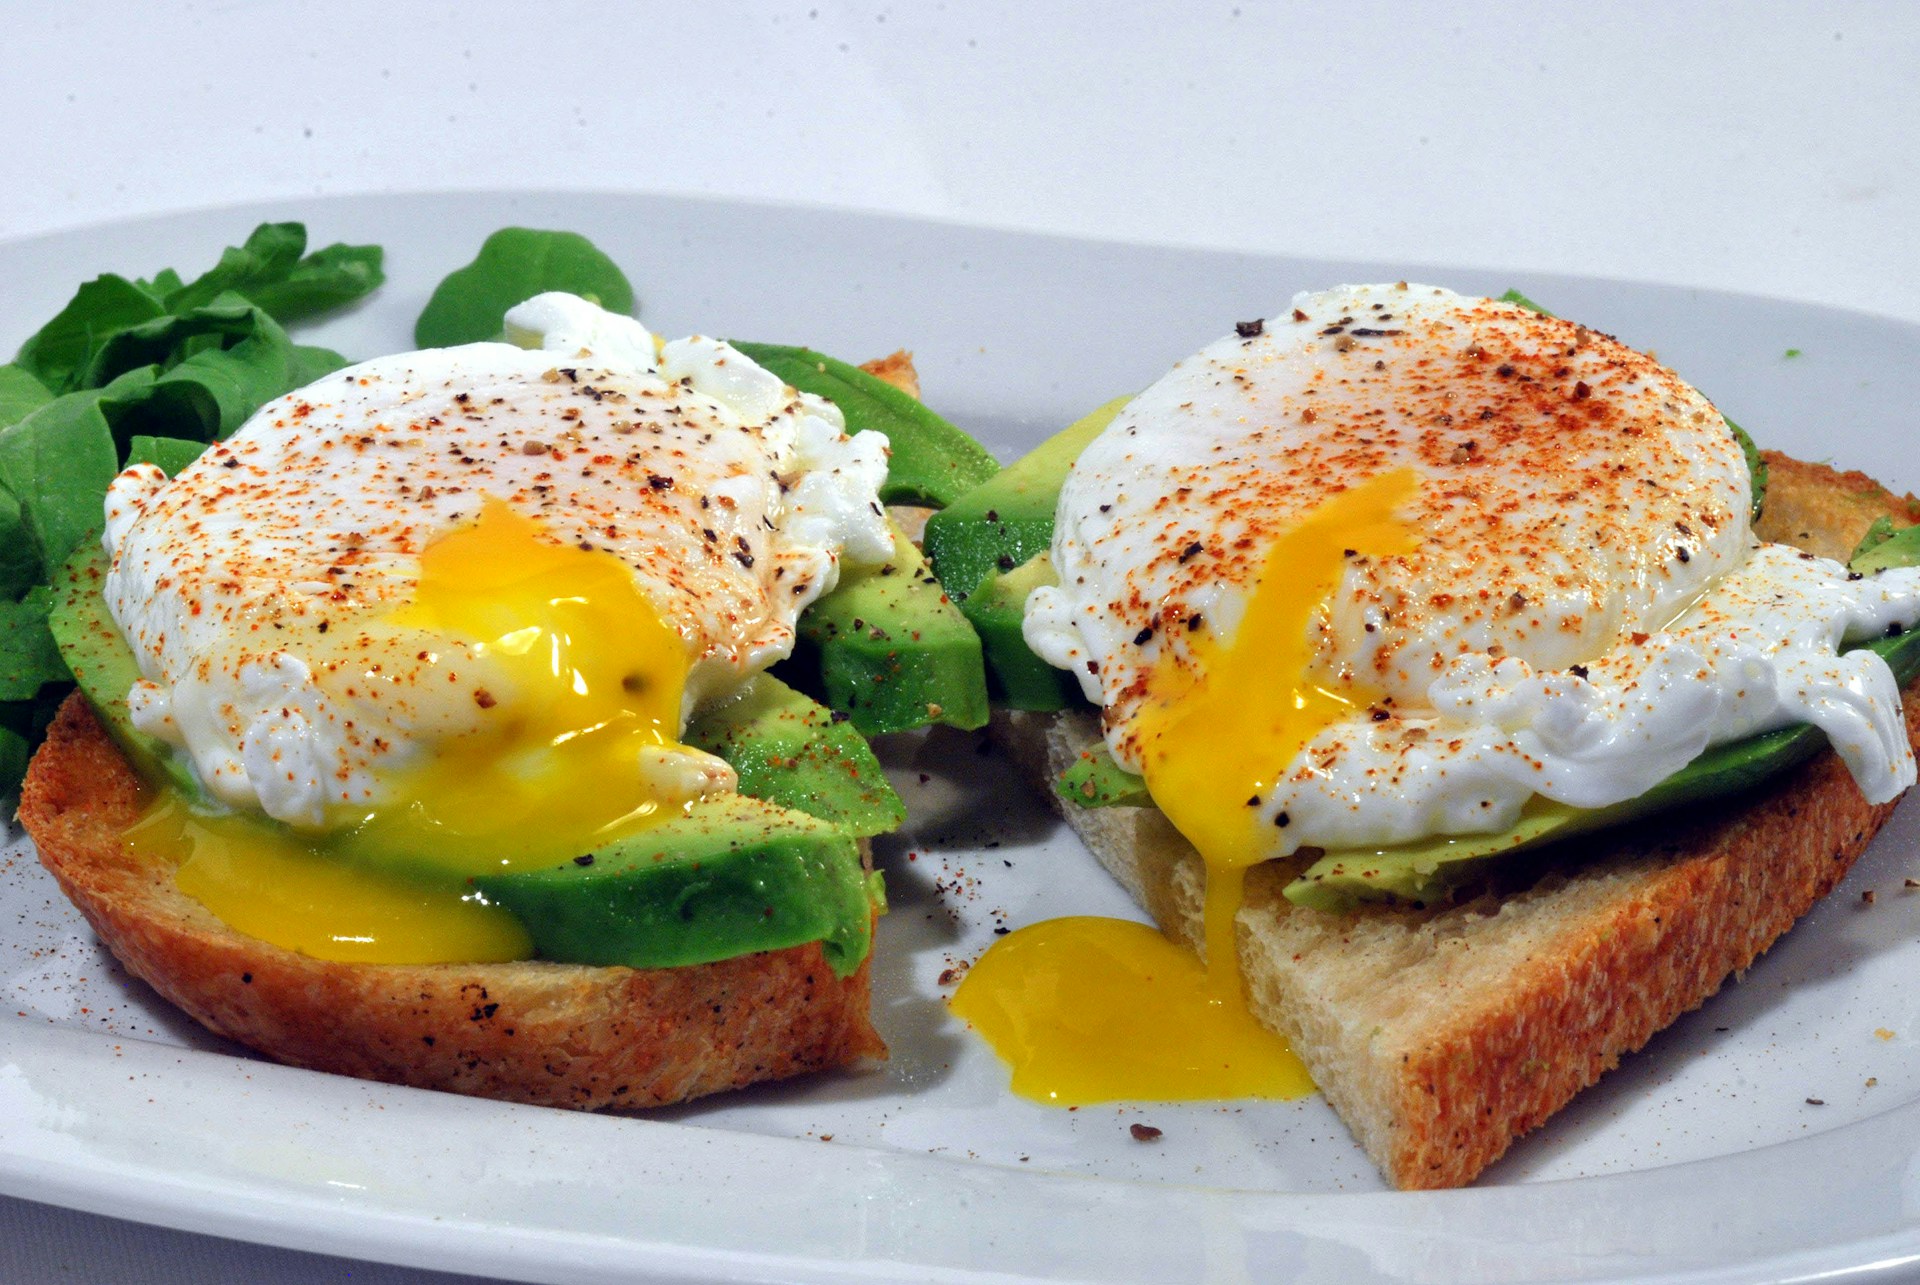 Avocado Toast: The breakfast you should have more often